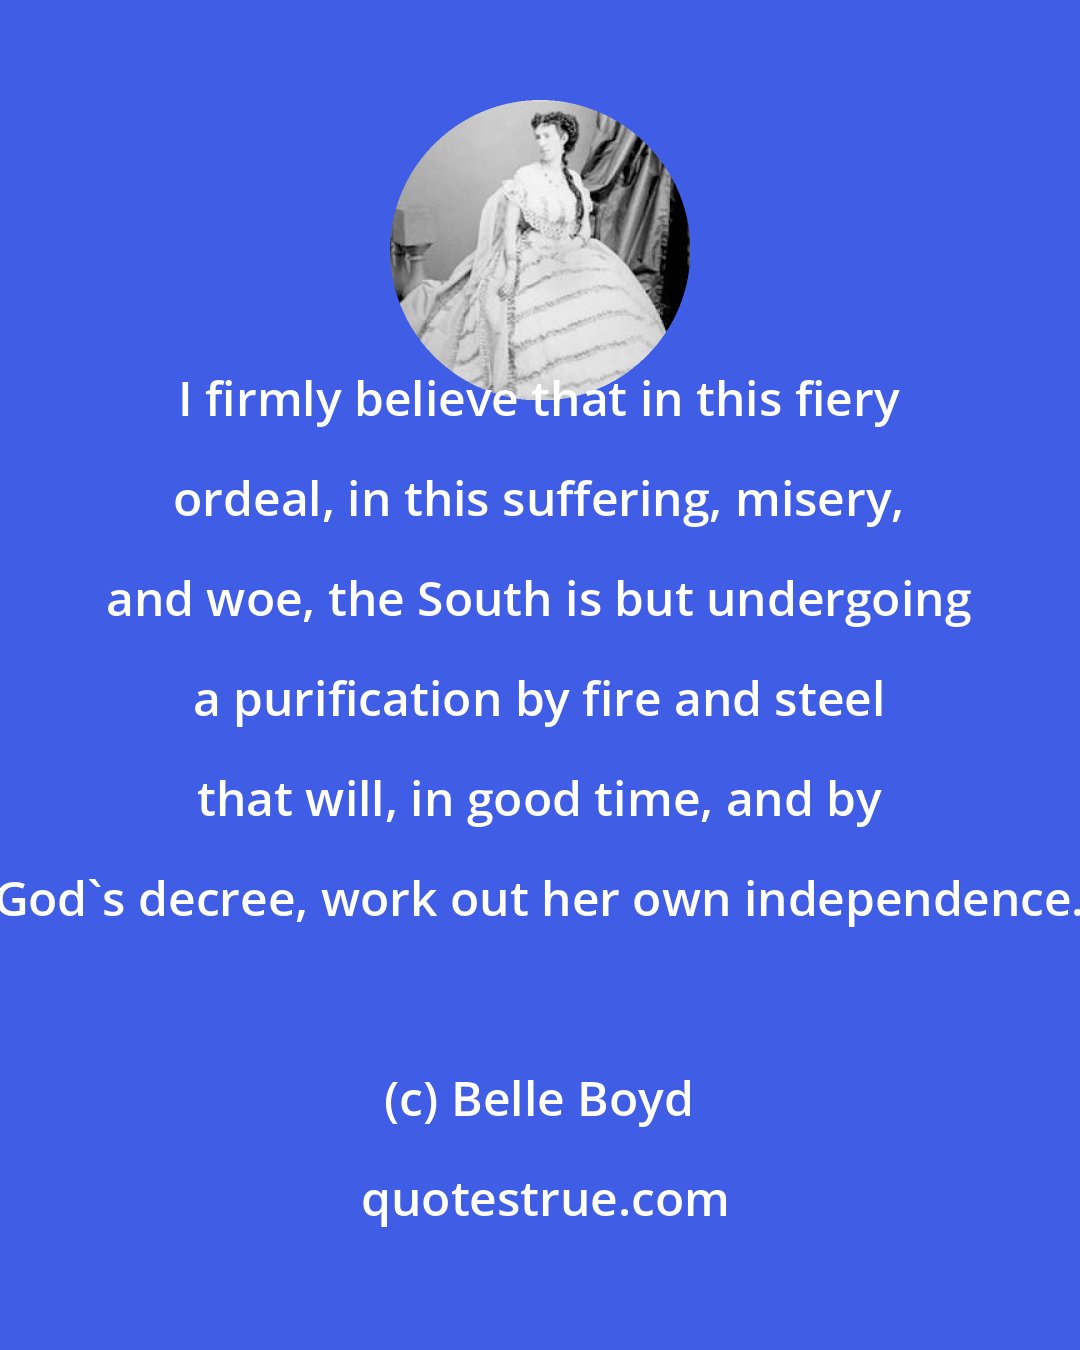 Belle Boyd: I firmly believe that in this fiery ordeal, in this suffering, misery, and woe, the South is but undergoing a purification by fire and steel that will, in good time, and by God's decree, work out her own independence.